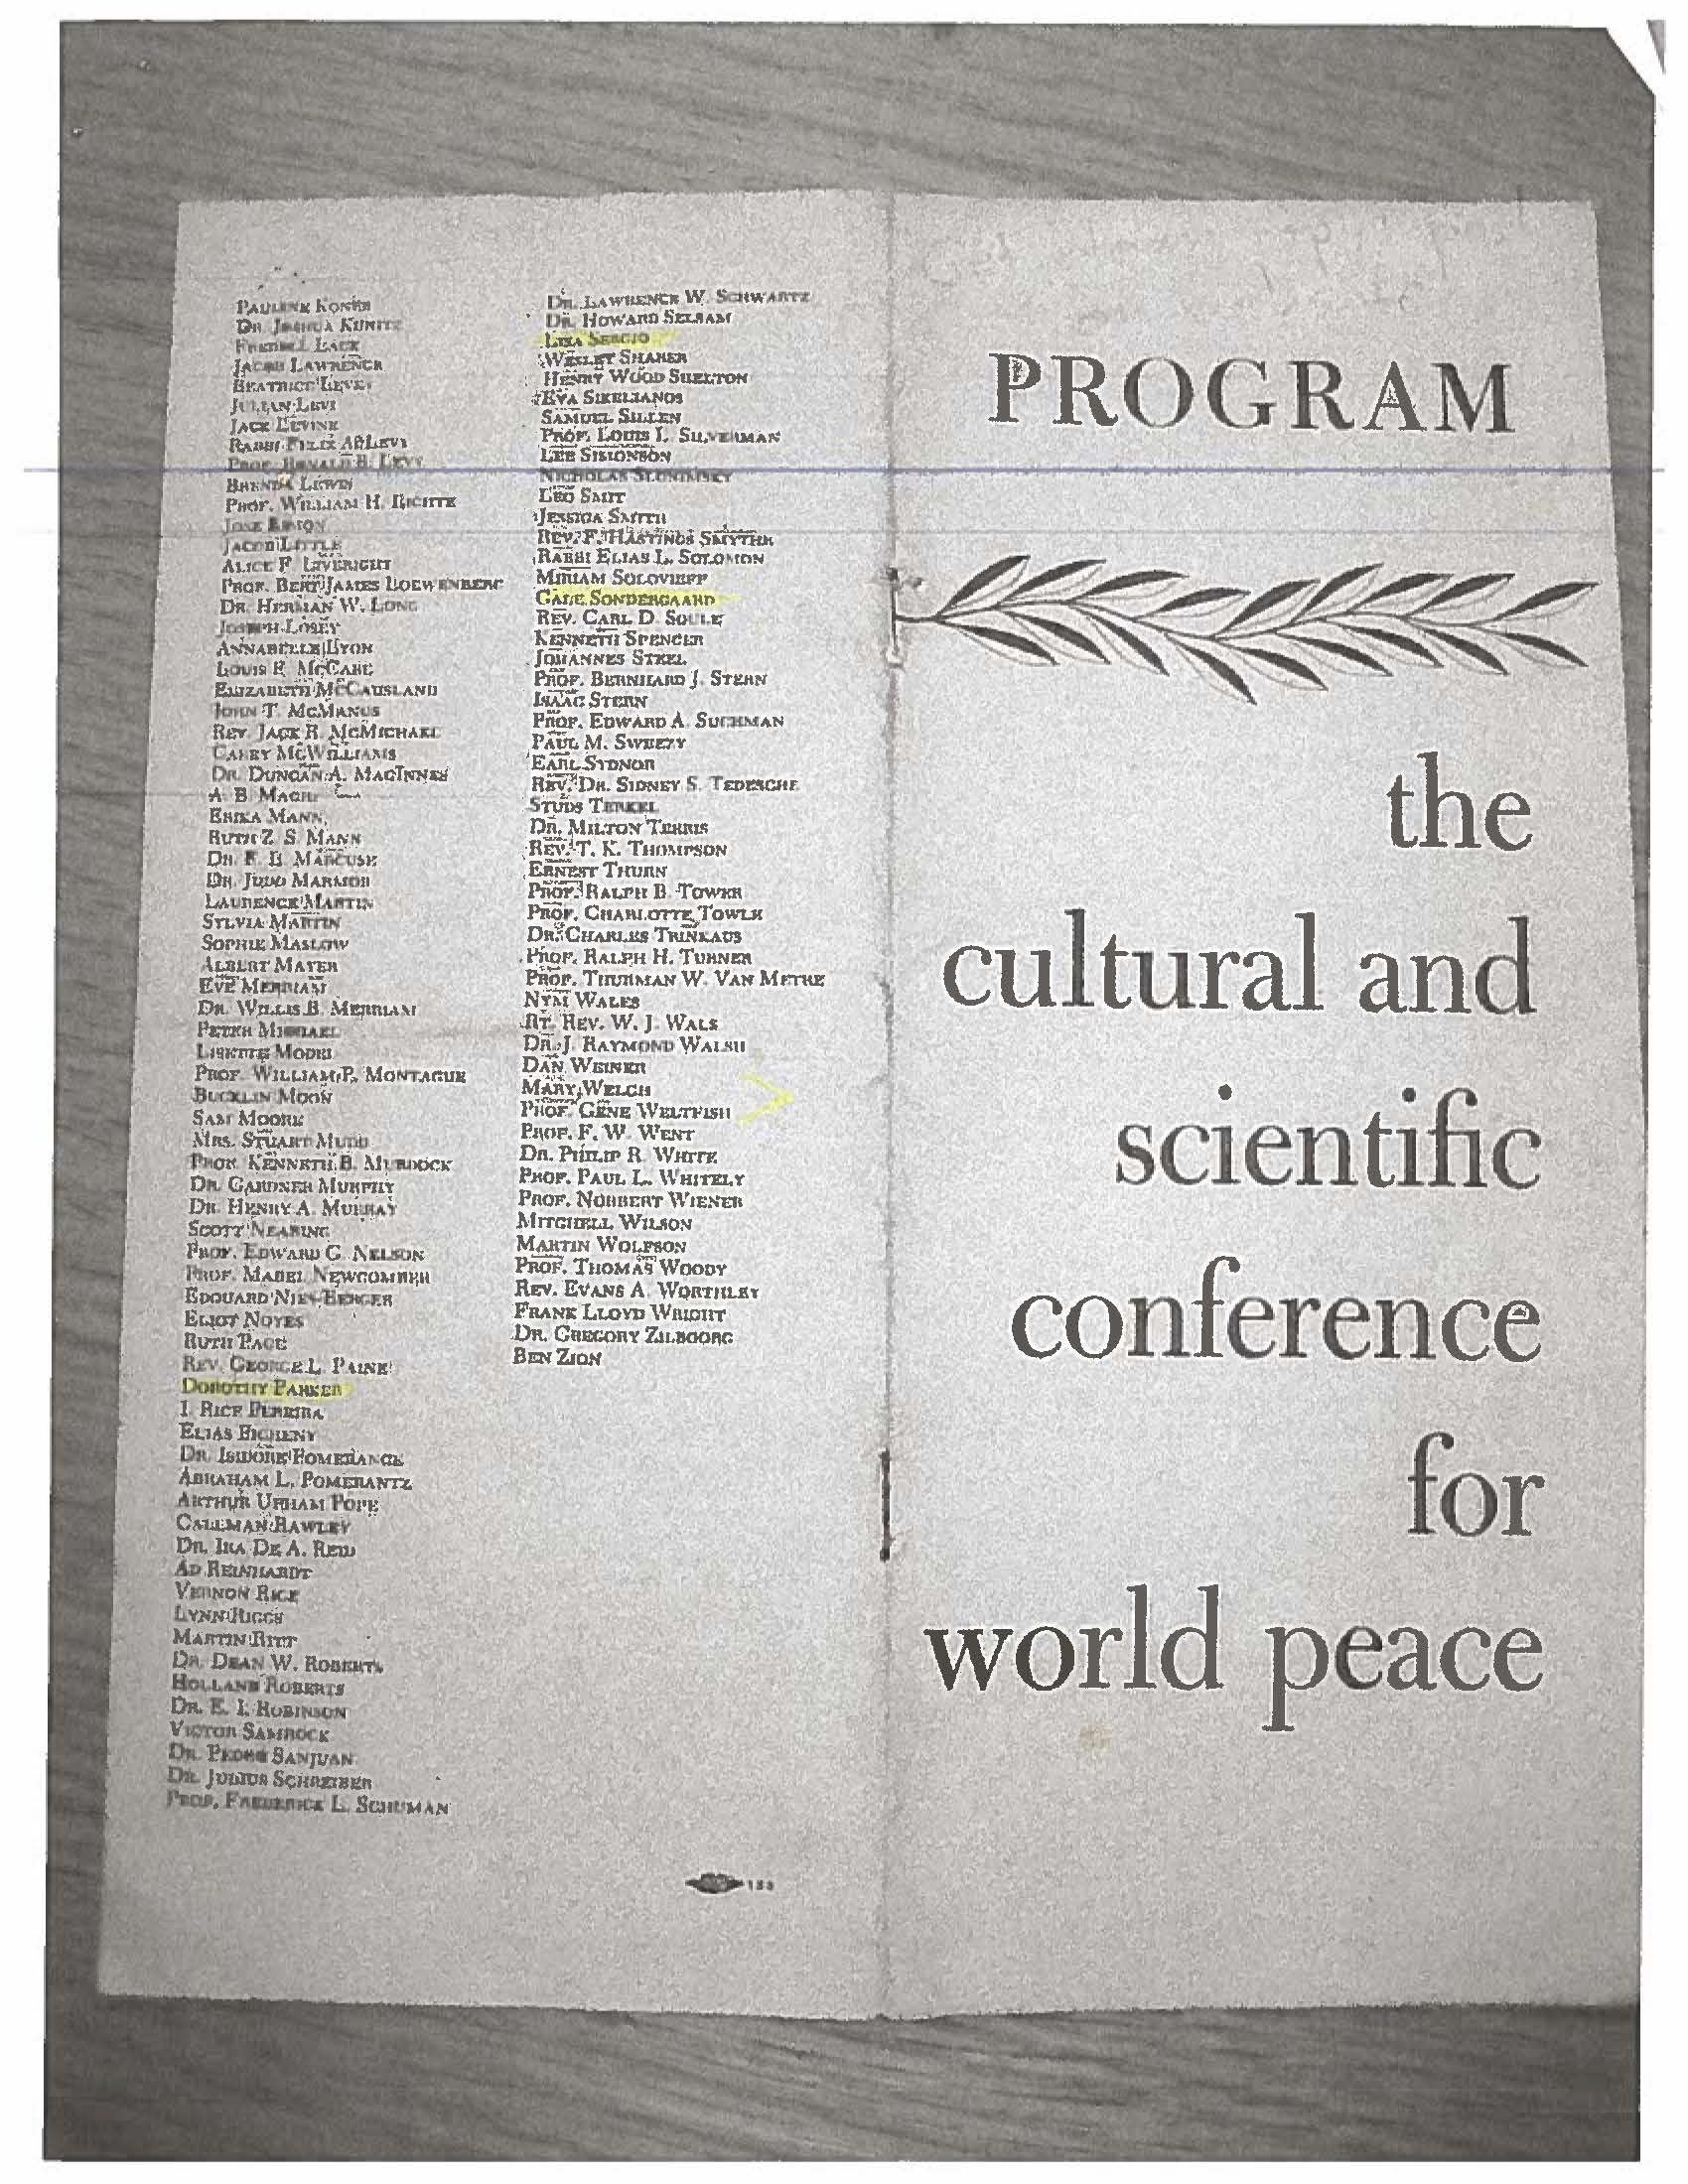 Program for "The Cultural and Scientific Conference for World Peace"